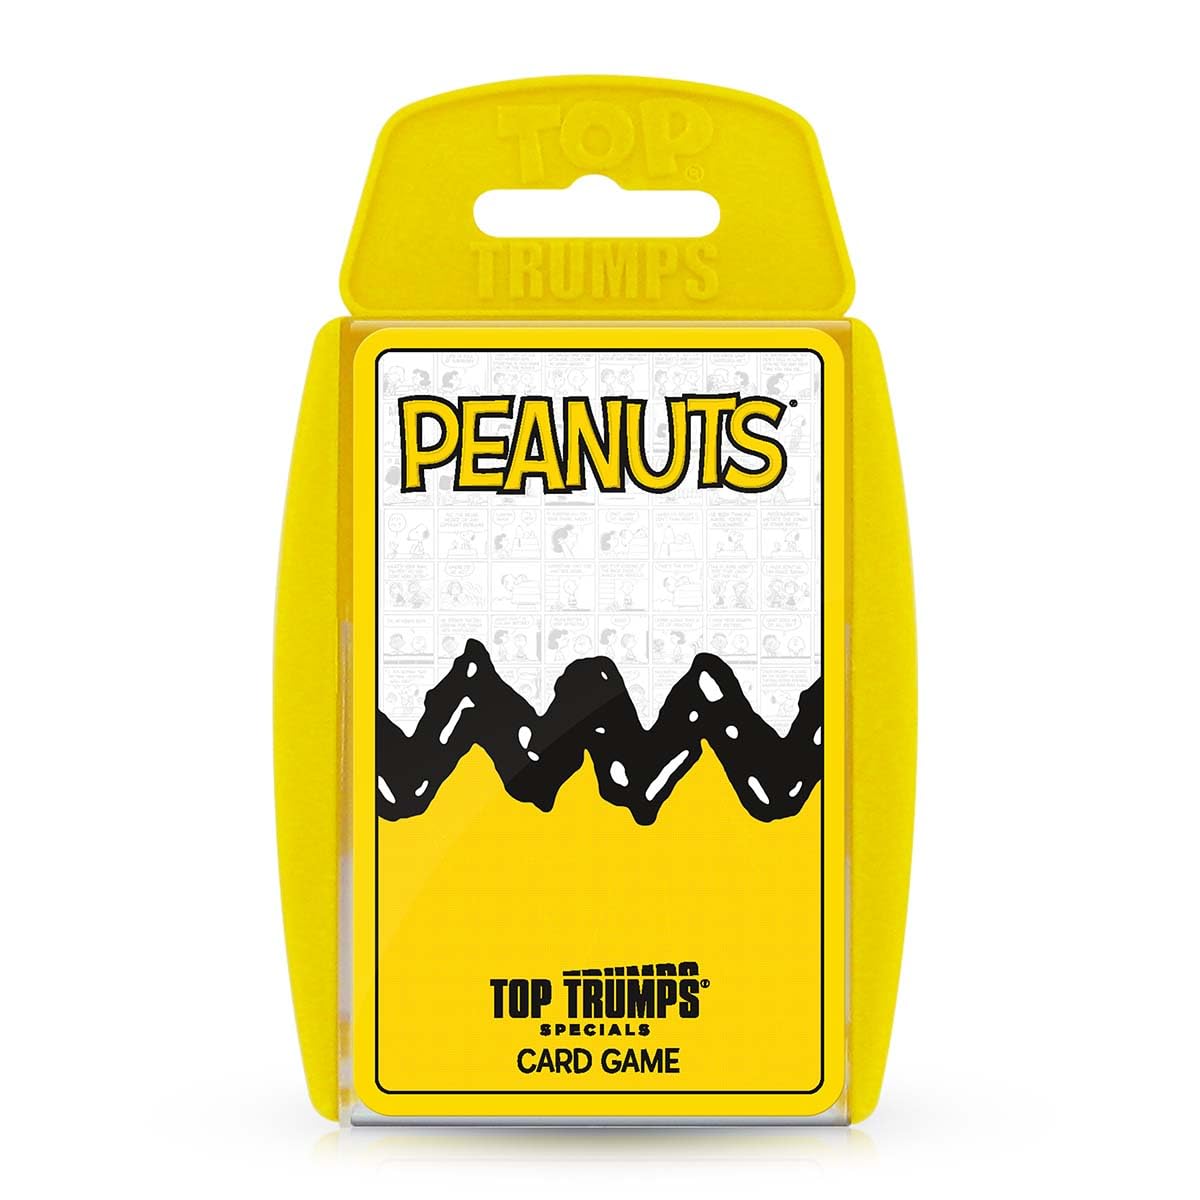 Peanuts Top Trumps; Entertaining Game Exploring Characters and Events from Snoopy Comics|Fun Family Game for Ages 6 & up